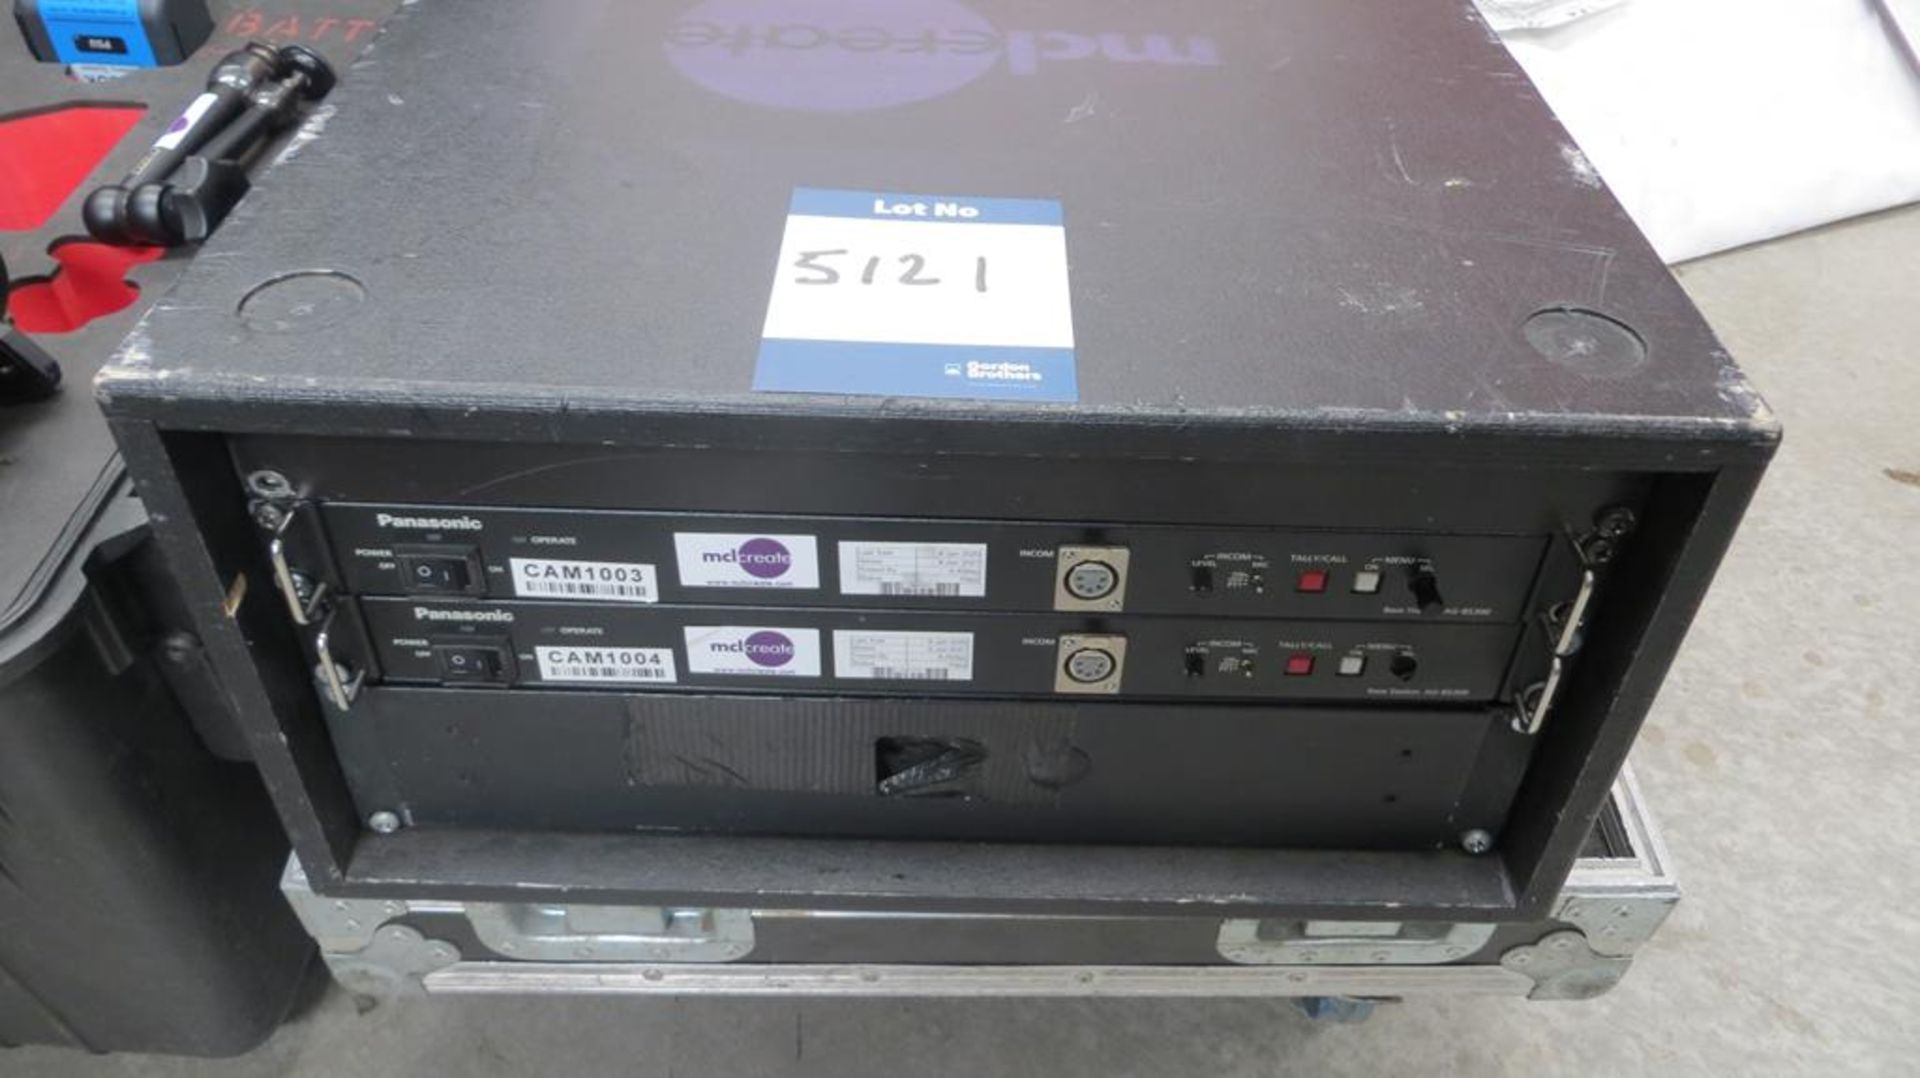 2x No. Panasonic, broadcast system camera in trans - Image 2 of 3